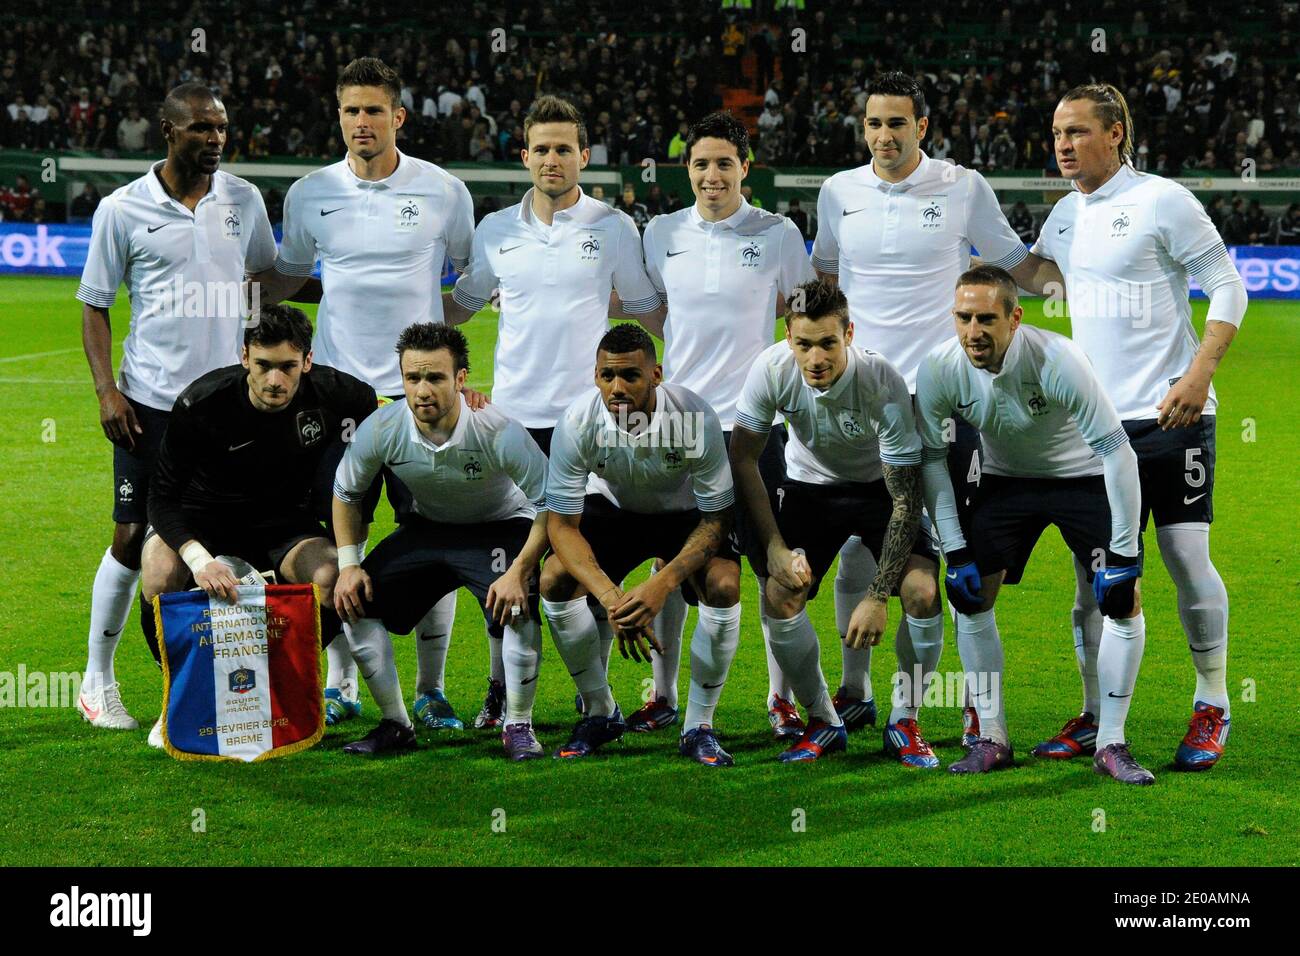 France's team group during the international Friendly soccer match, Germany vs France at the Weser stadium in Bremen, Germany on February 29, 2012. France won 2-1. Photo by Henri Szwarc/ABACAPRESS.COM Stock Photo